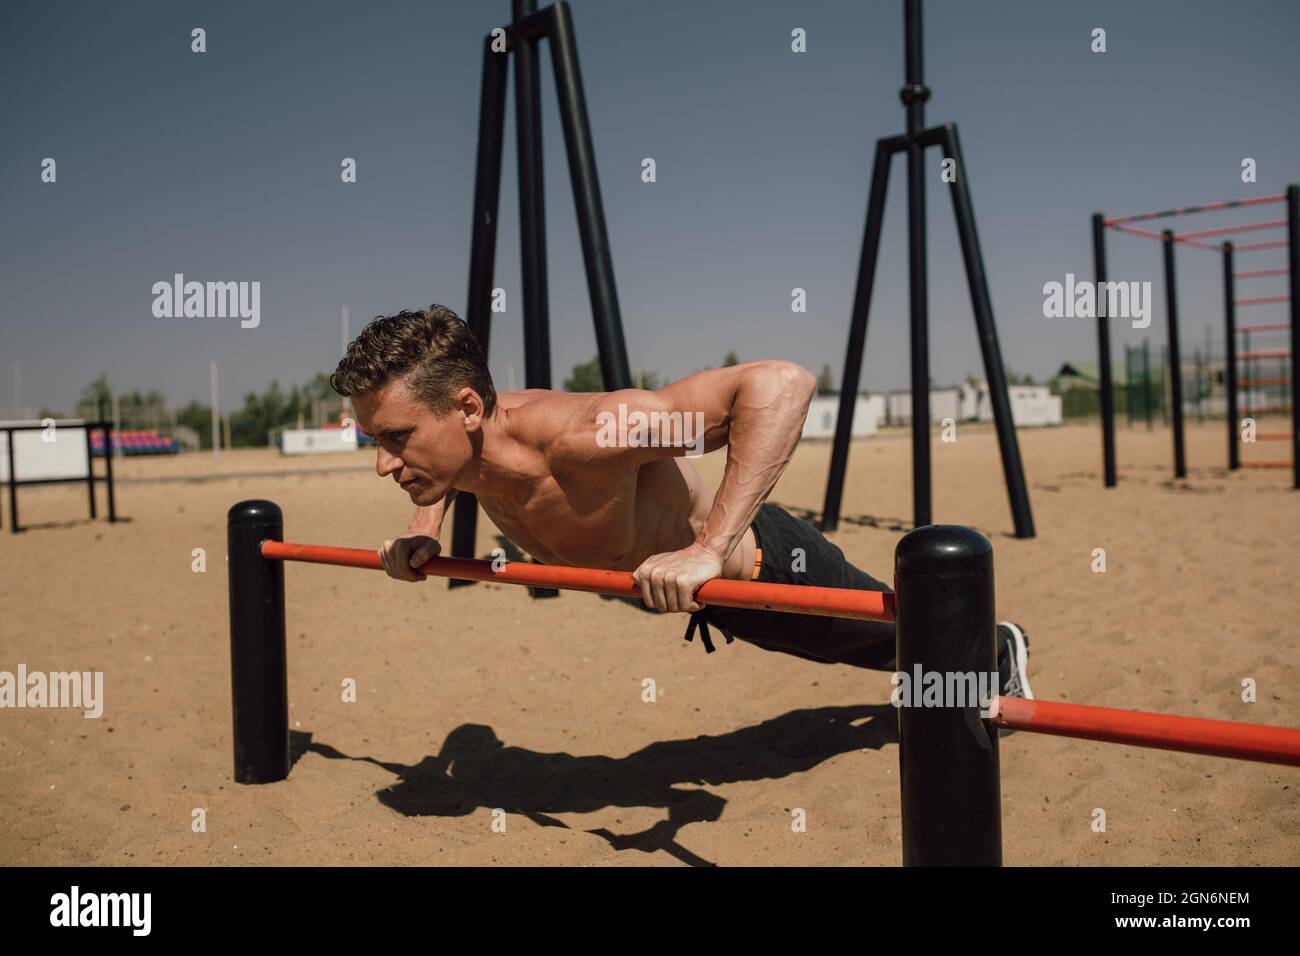 fitness, sport, training and lifestyle concept - young man exercising handstand on bar outdoors - calisthenics Stock Photo